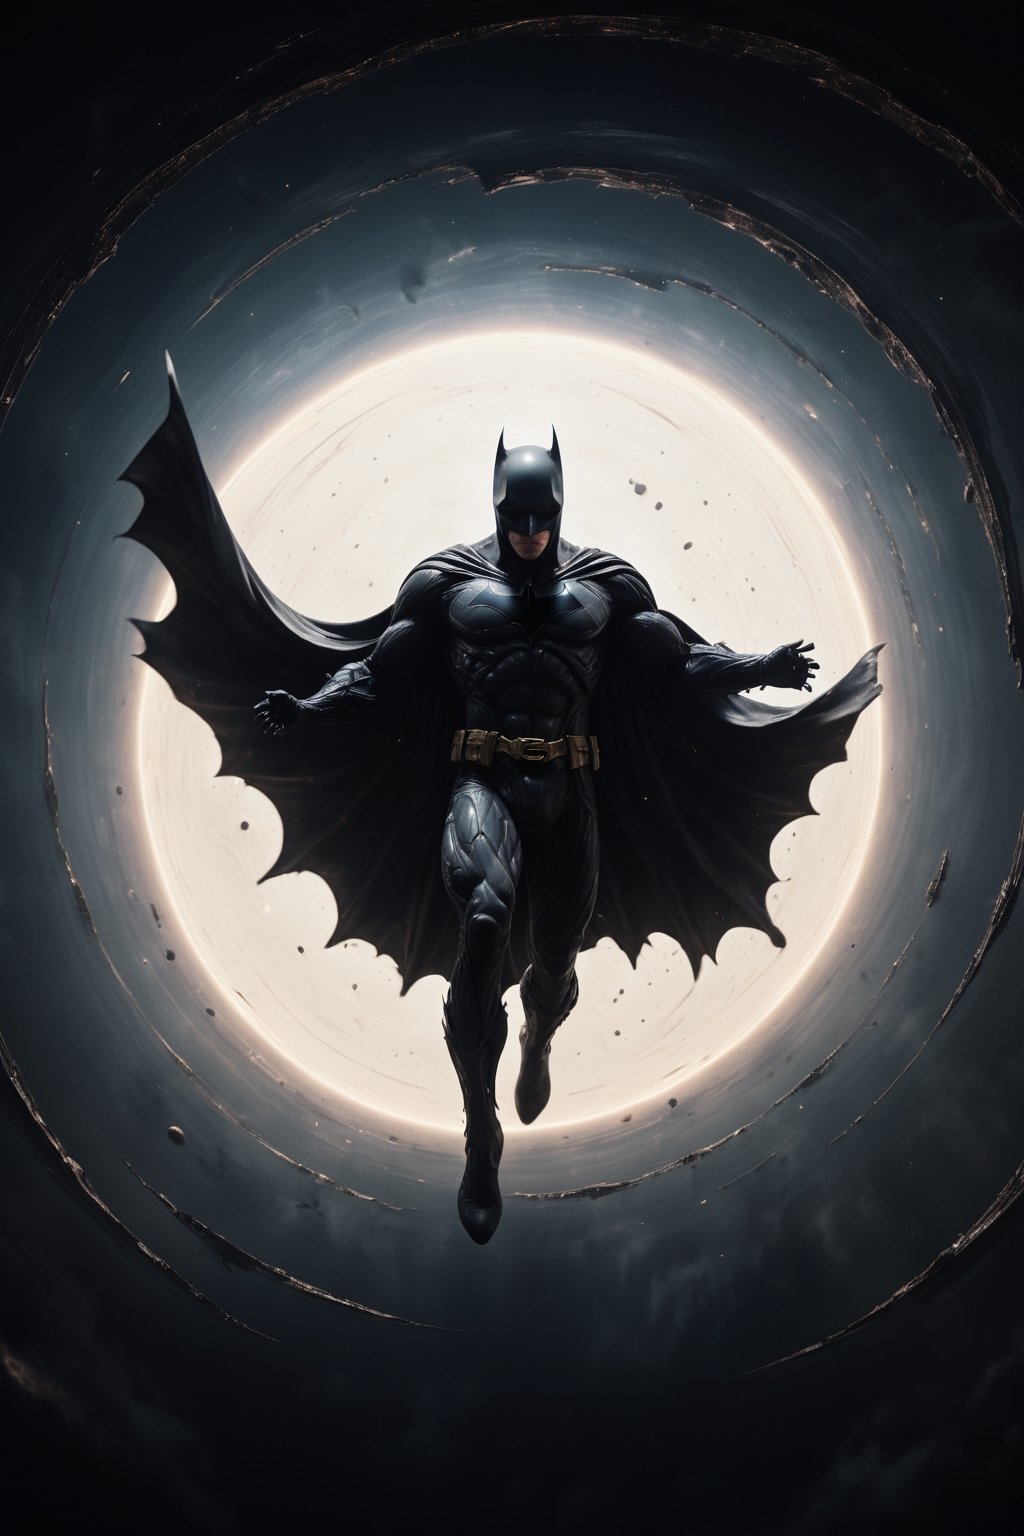 Cinematic shot of Batman, a god-like figure, levitating within the endless void of space. A black hole swirls ominously behind him, its immense gravity distorting the light around him. He spreads his arms wide, a gesture of both defiance and control. The scene is both terrifying and strangely beautiful, capturing the power of nature and the resilience of the human spirit. The art style is modern, with a mix of dark and ethereal colors. The image is rendered with extreme detail and high-quality processing, achieving a level of photorealism and cinematic quality that is truly mesmerizing.